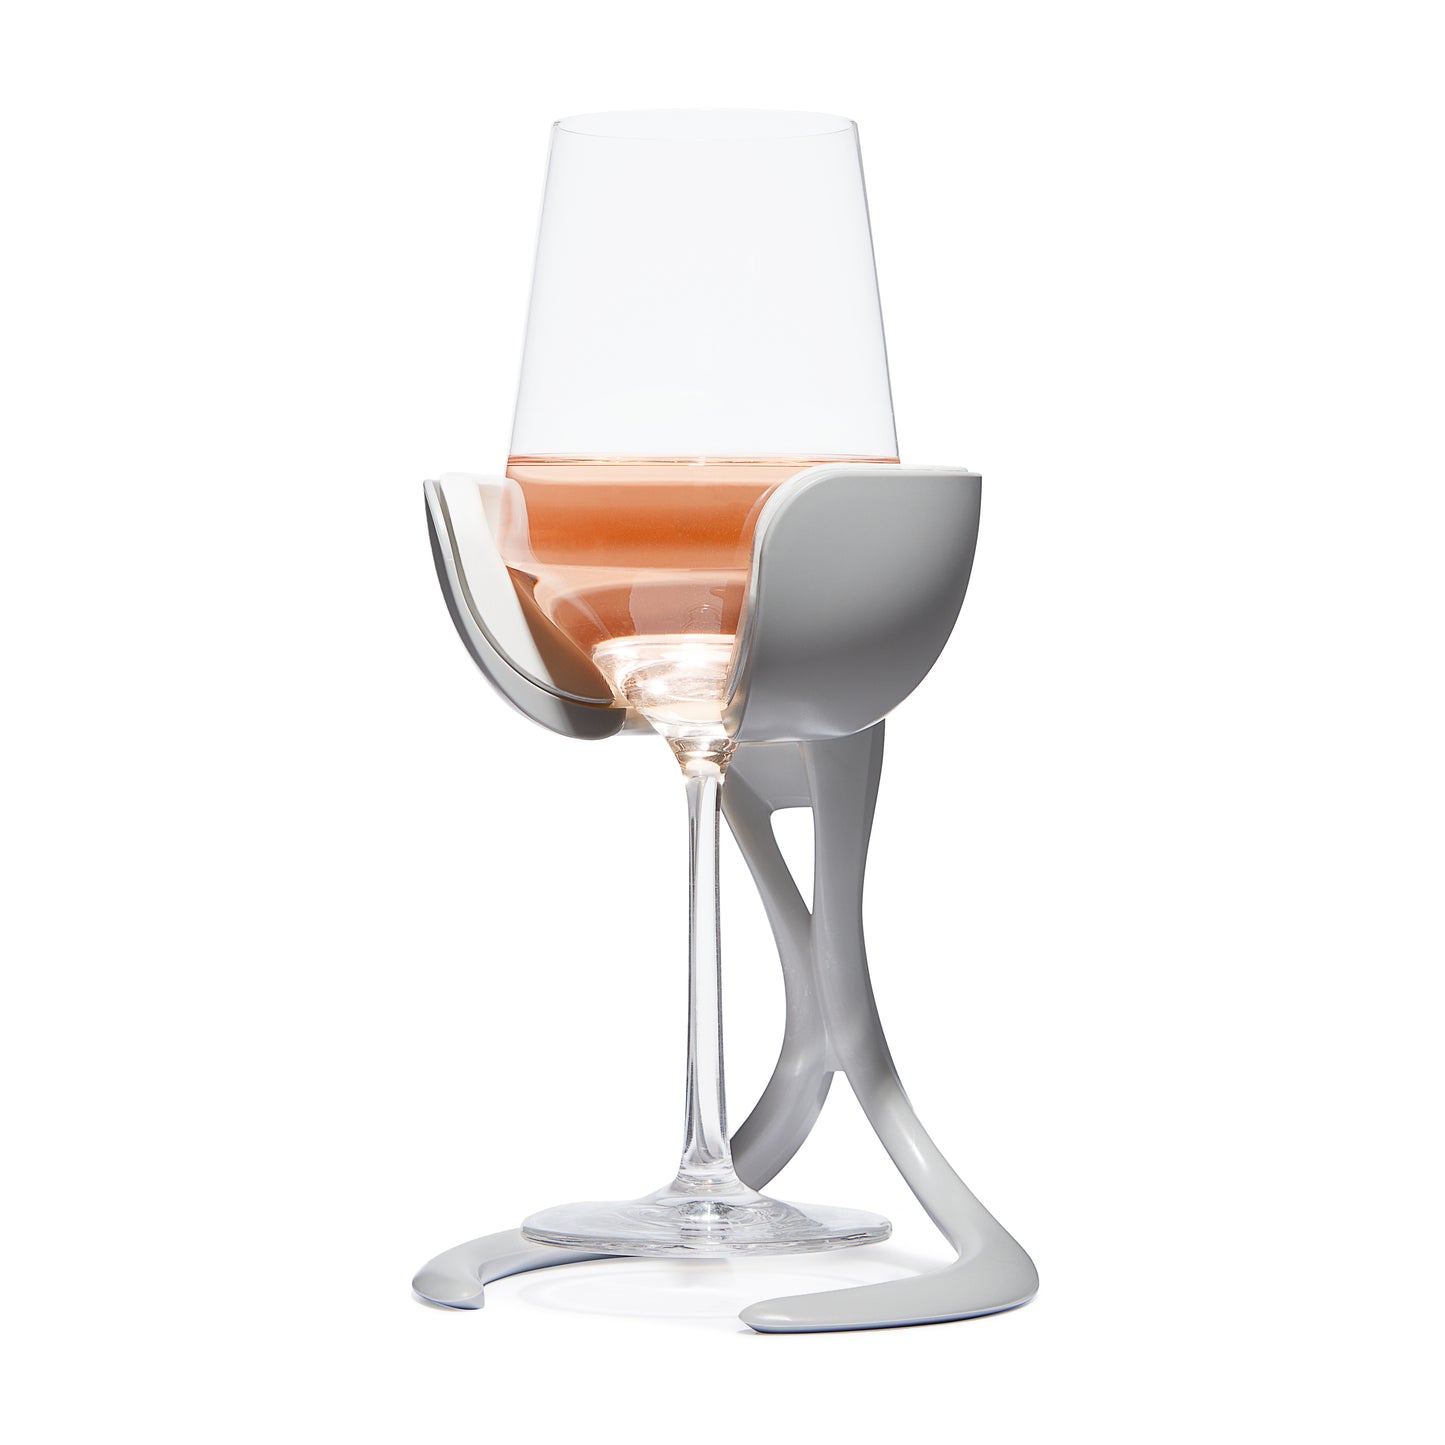 Stone color stemmed wine glass chiller on white background by VoChill Inc.